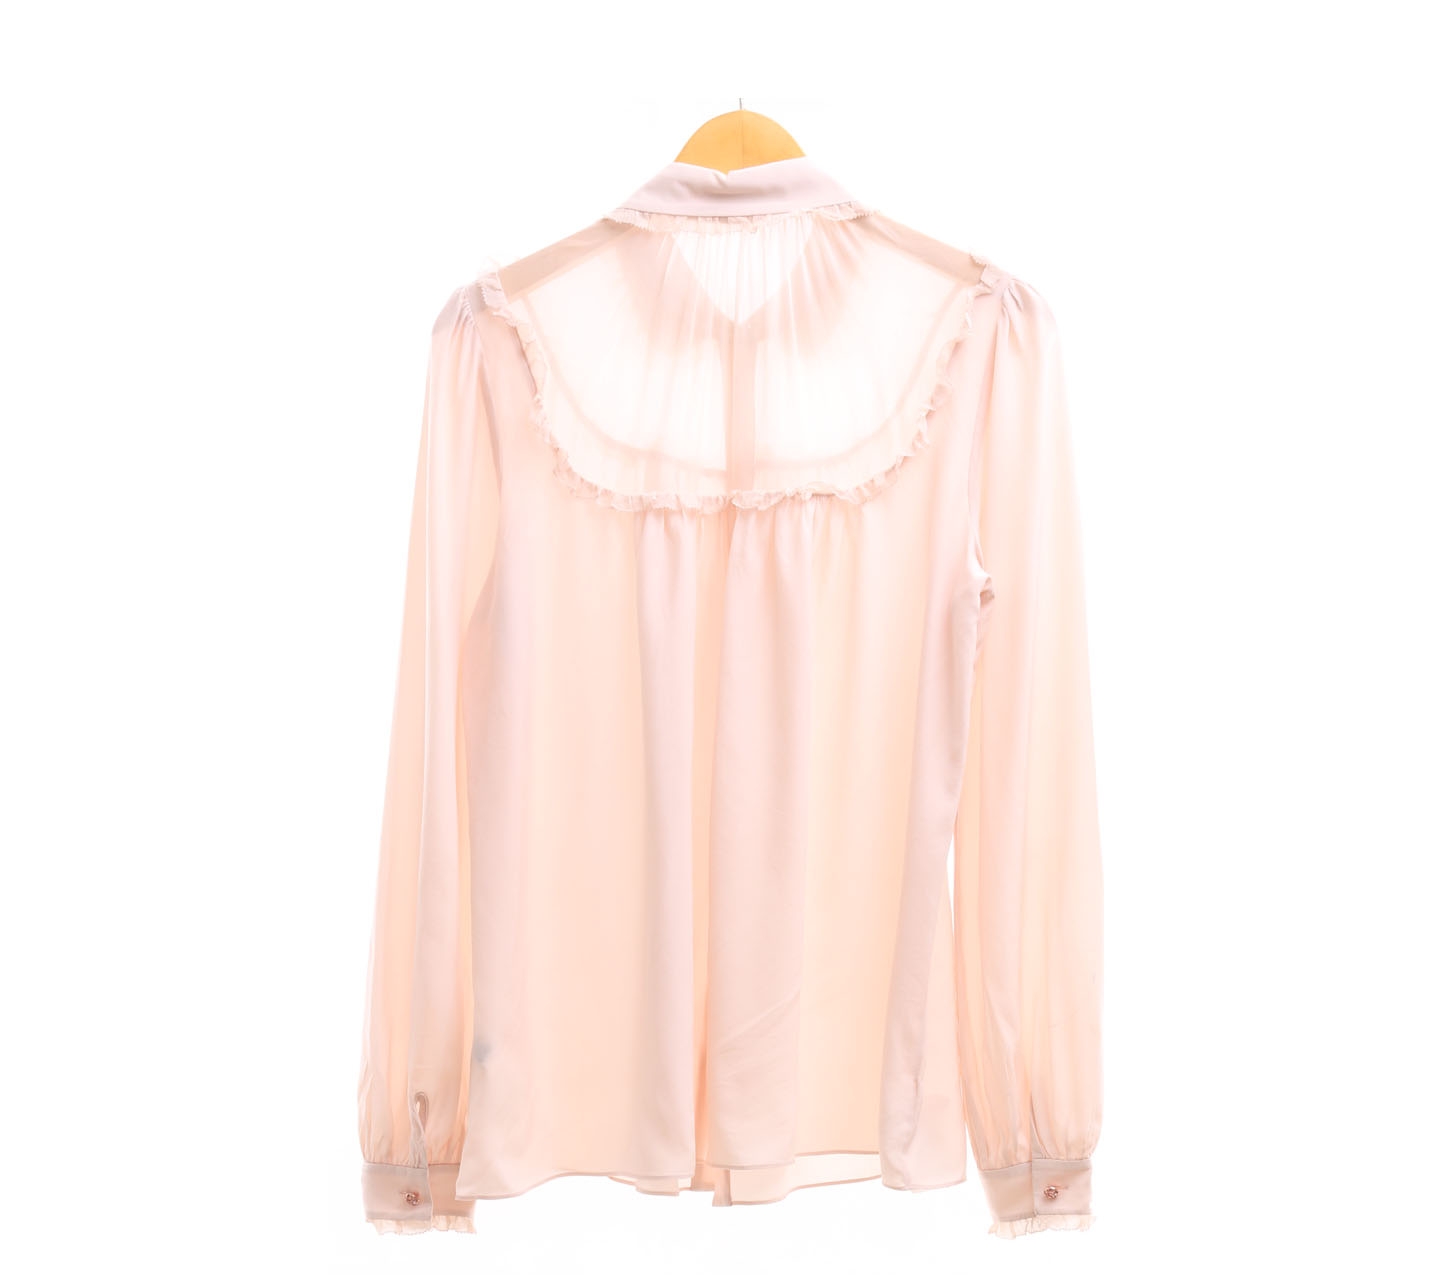 Kate Spade The Madison Ave Collection Peach Shirt